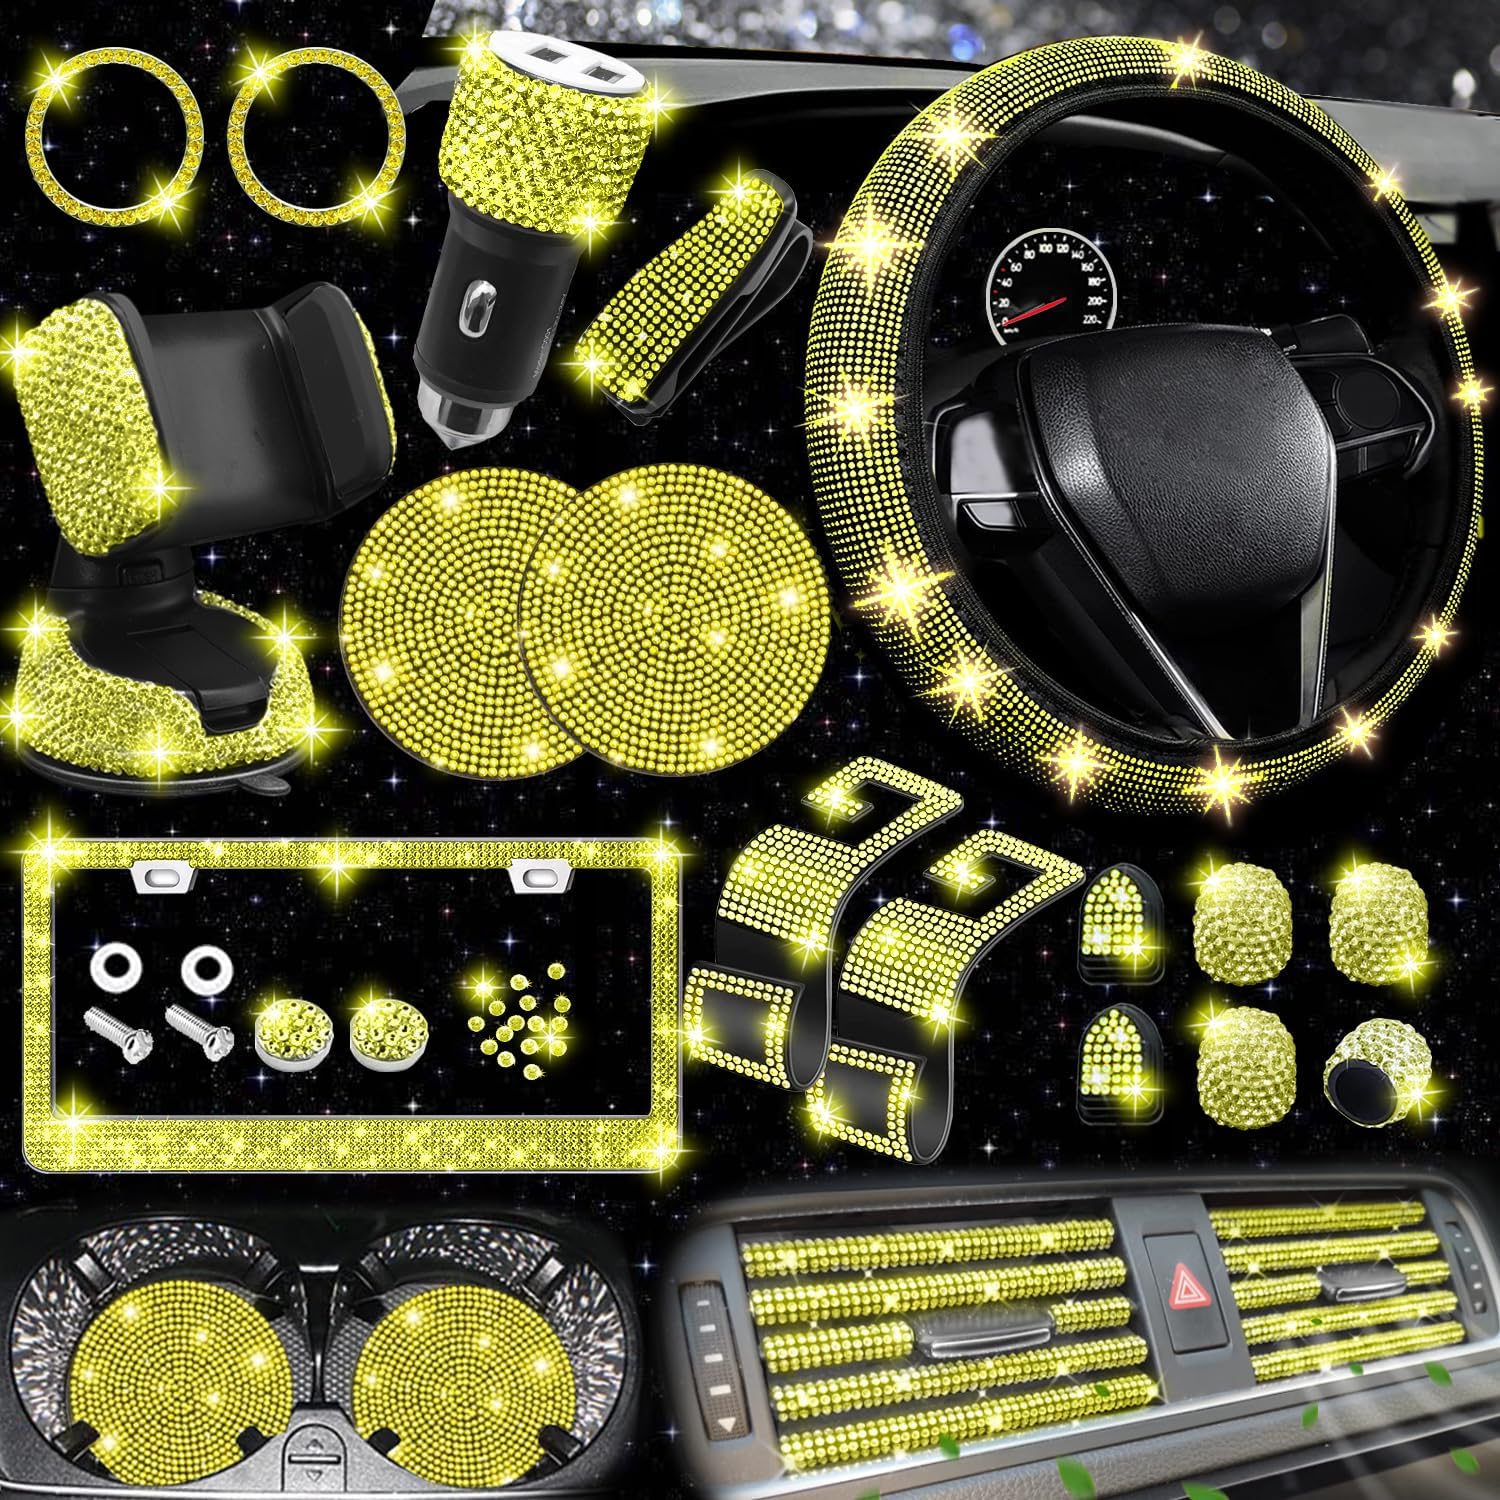 27 PCs Bling Car Accessories Set for Women, Bling Steering Wheel Covers Universal Fit 15 Inch, Bling License Plate Frame, Bling Phone Holder, Bling Car Coasters (Yellow Diamond)